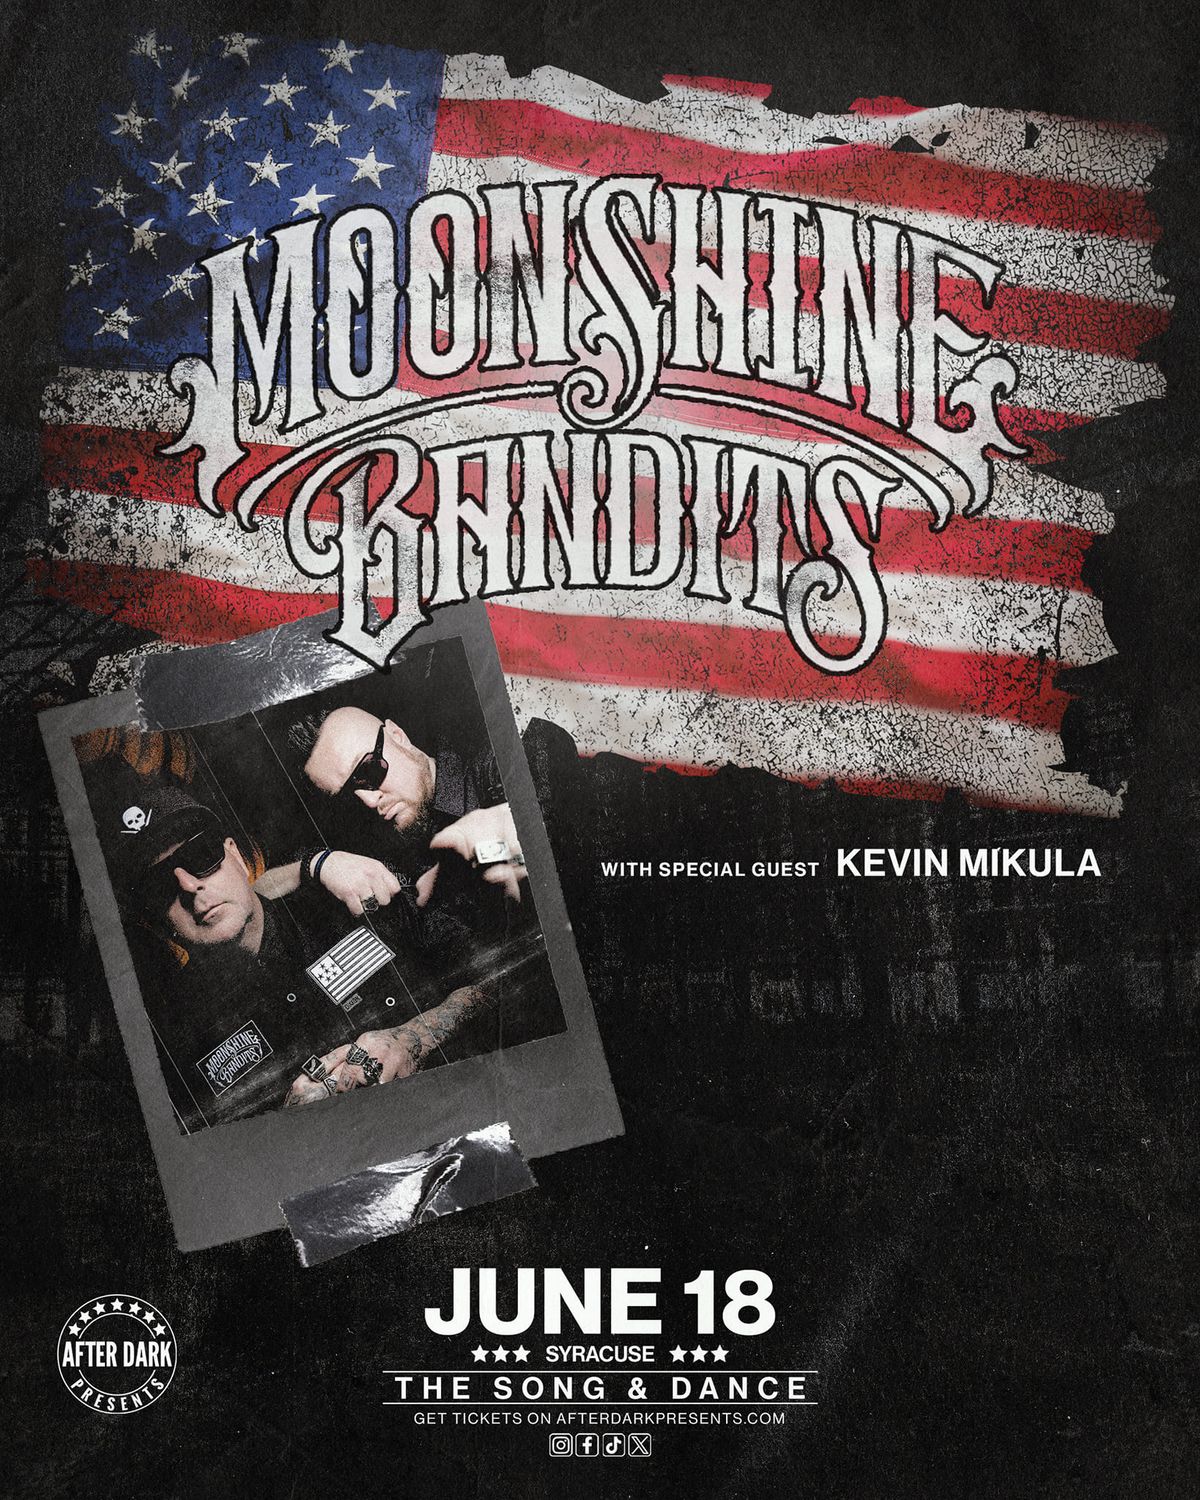 Kevin Mikula Solo Acoustic Opening for The Moonshine Bandits